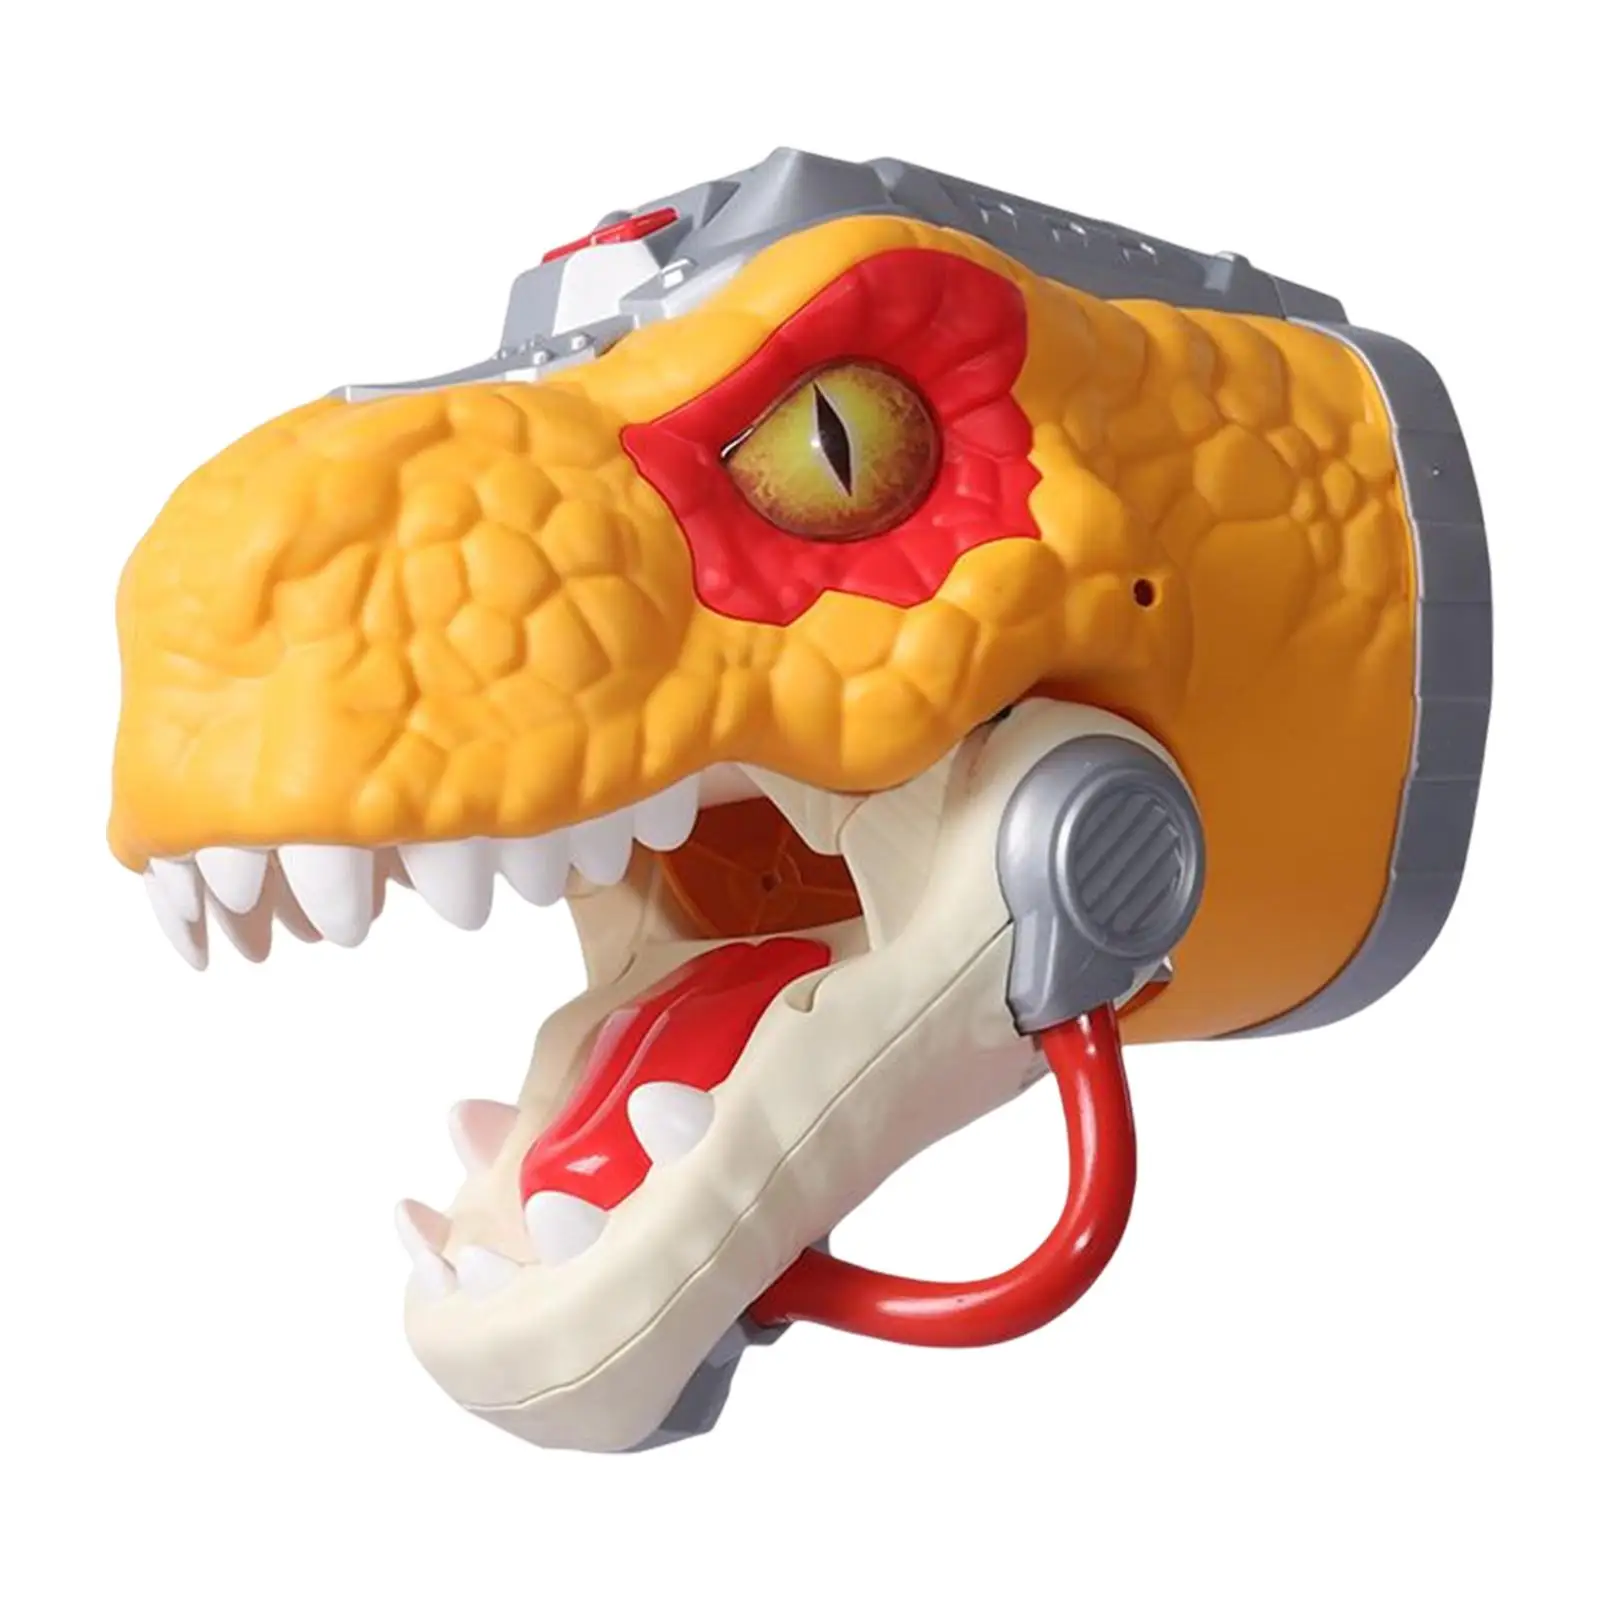 Simulation Dinosaur Hand Puppet Toy Early Development Activity Toy Dinosaur Toy with Sound and Light for Kids Girls Boys